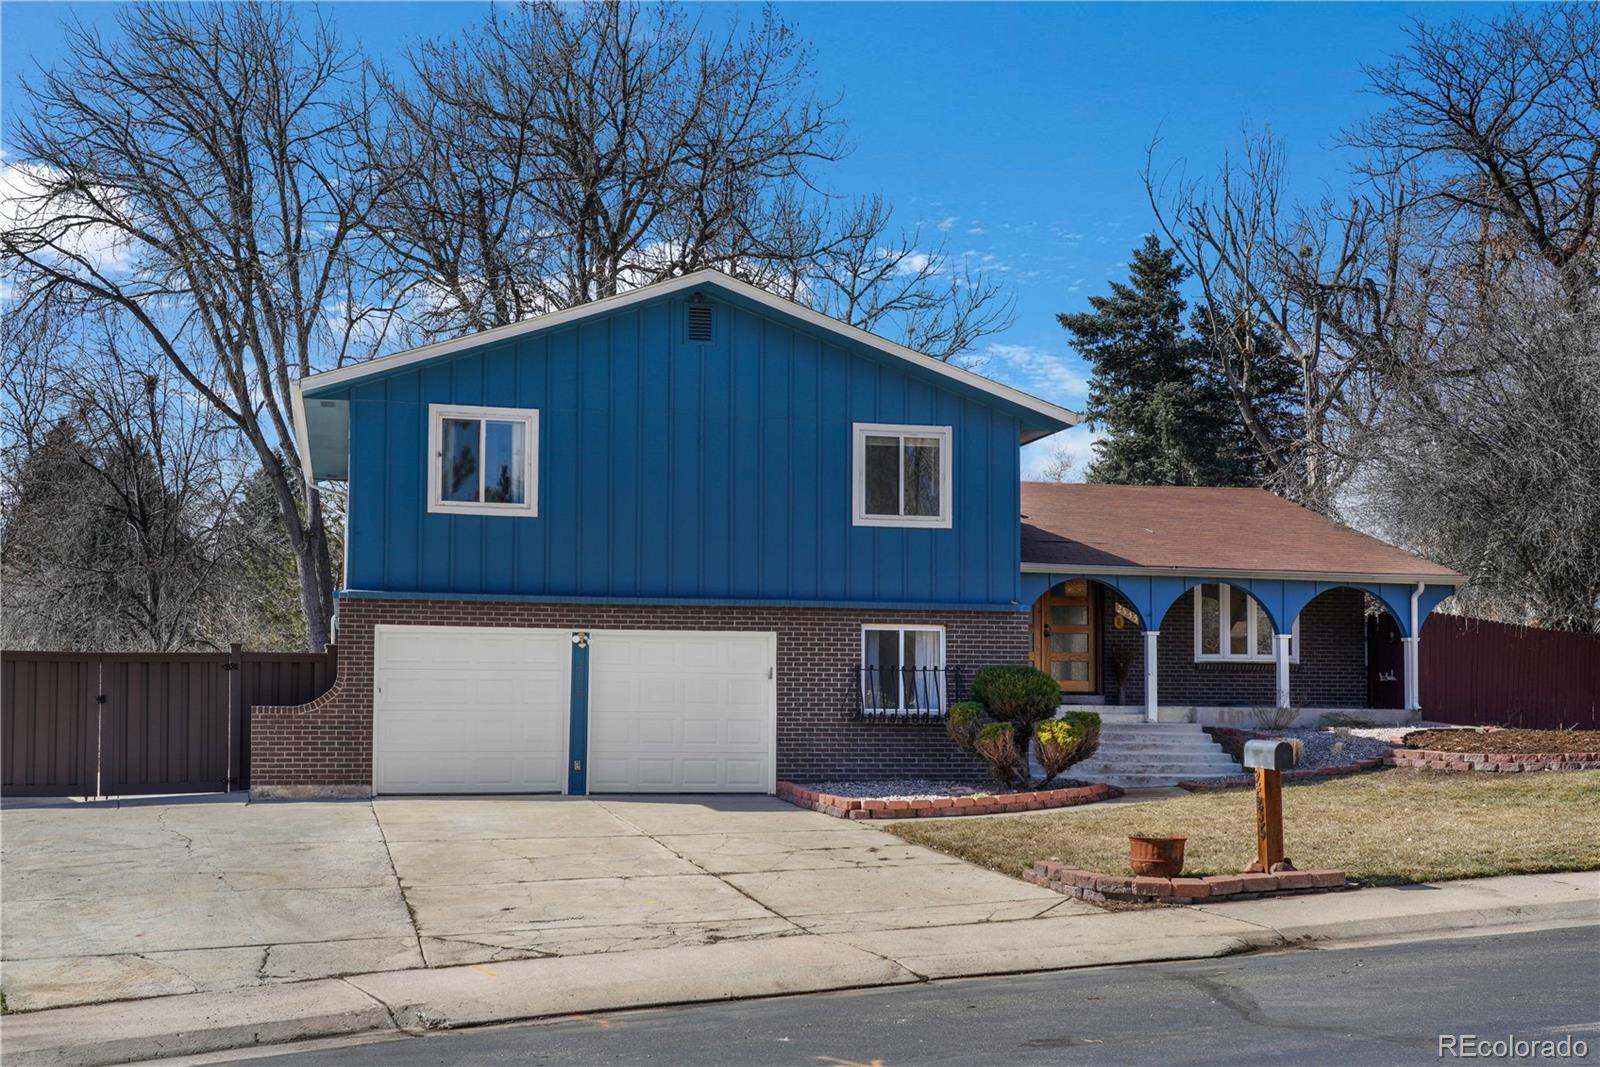 Report Image for 2535 S Allison Court,Lakewood, Colorado